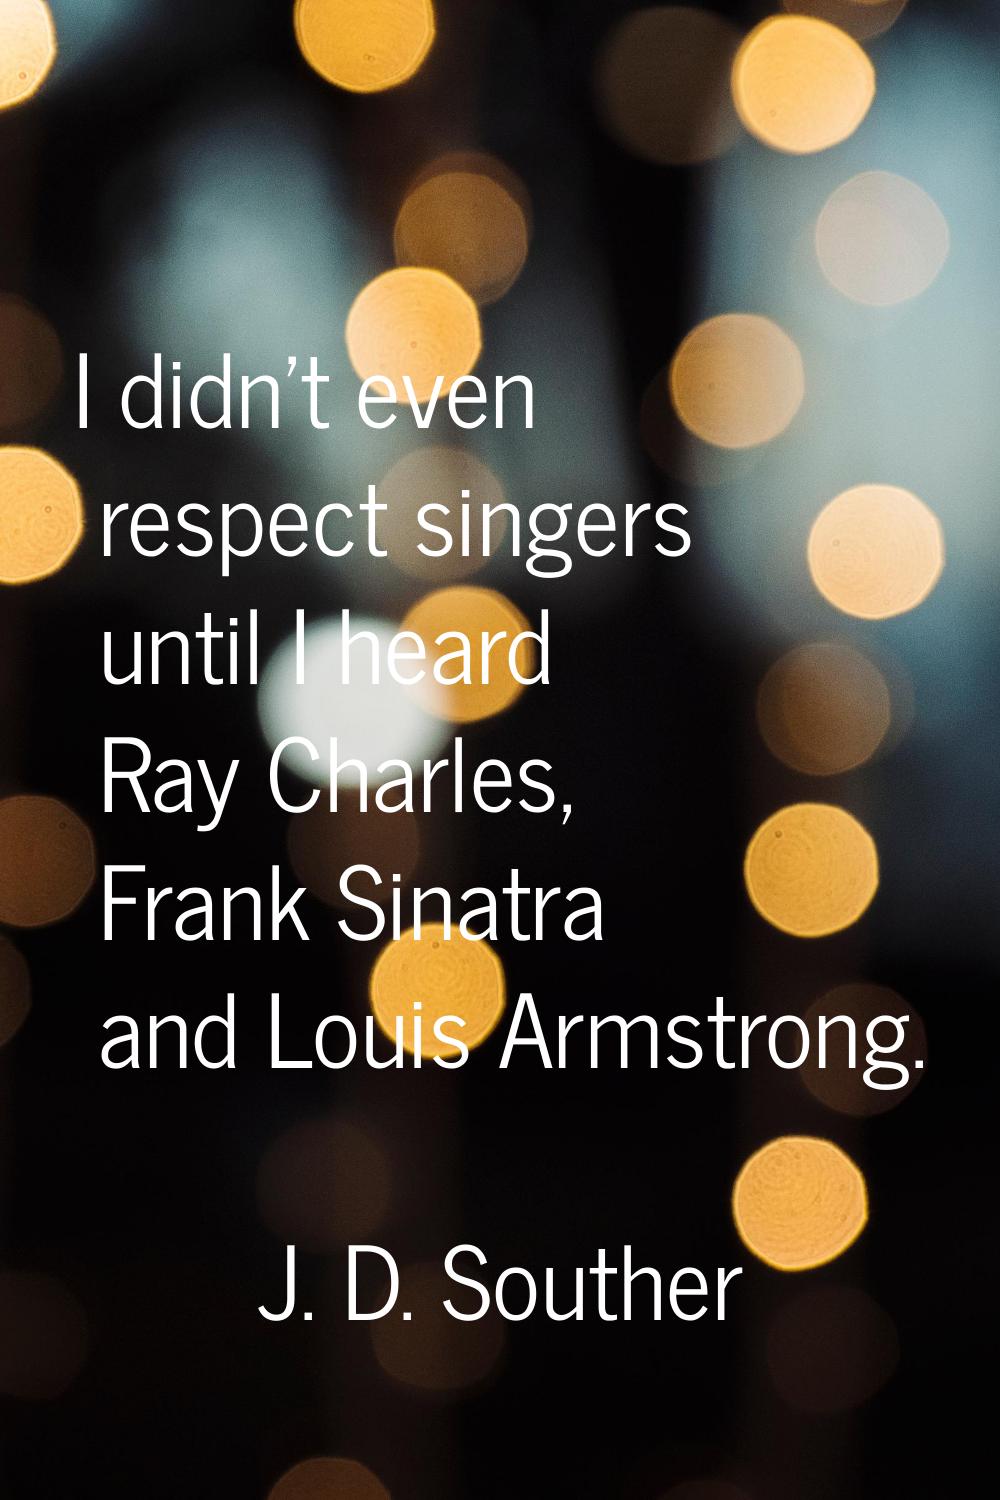 I didn't even respect singers until I heard Ray Charles, Frank Sinatra and Louis Armstrong.